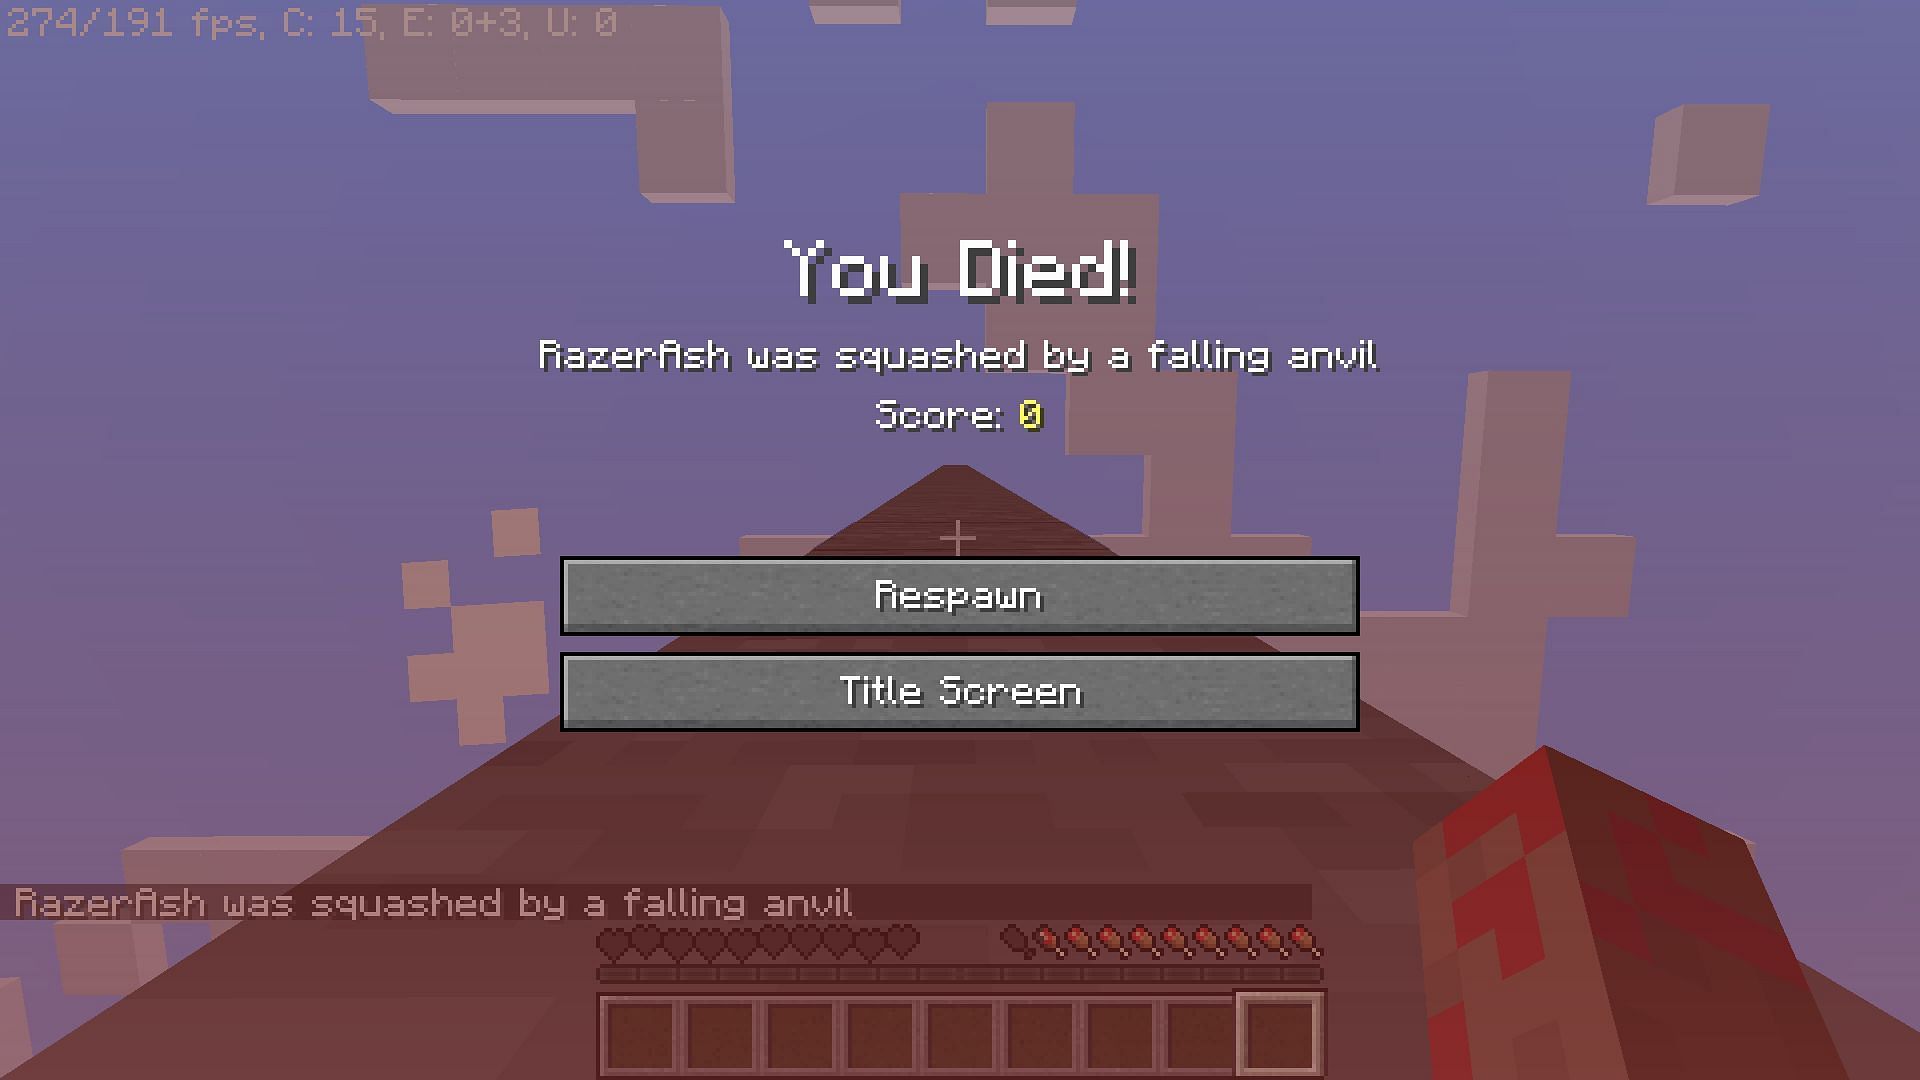 The message afte rplayers get crushed by an anvil (Image via Minecraft)